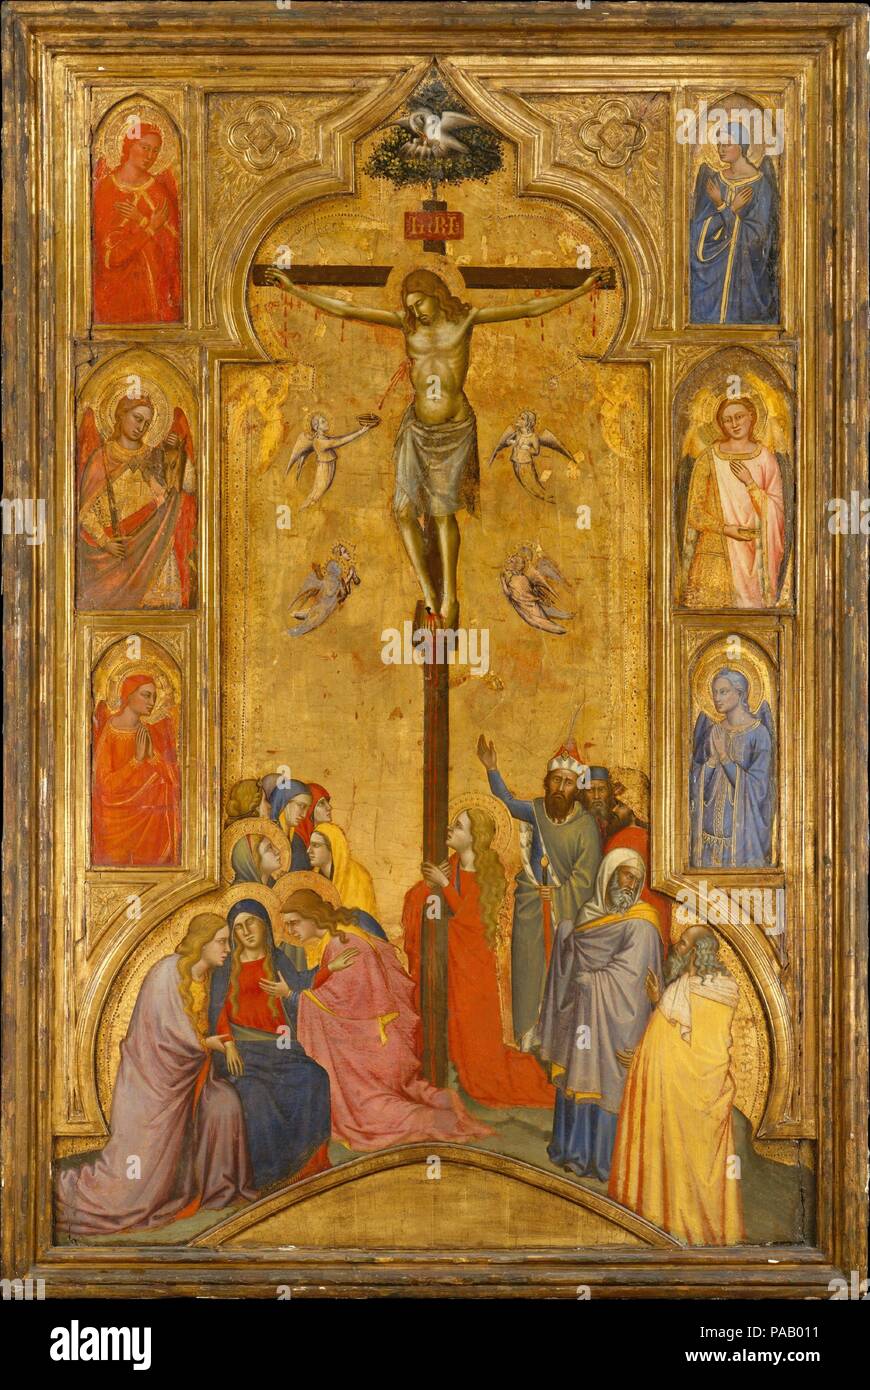 The Crucifixion. Artist: Andrea di Cione (Orcagna) (Italian, Florence 1315/20-1368 Florence) , and workshop. Dimensions: 54 1/8 x 32 1/4 in. (137.5 x 81.9 cm). Date: ca. 1365.  The Crucifixion and the six half-length angels mounted within the frame are fragments of an altarpiece; however their current arrangement does not reflect that of the original altarpiece but rather a reconfiguration by a 19th-century collector. The Crucifixion originally formed the altarpiece's central pinnacle while the Six Angels originally comprised pilasters. The altarpiece was probably painted for Santa Maria degli Stock Photo